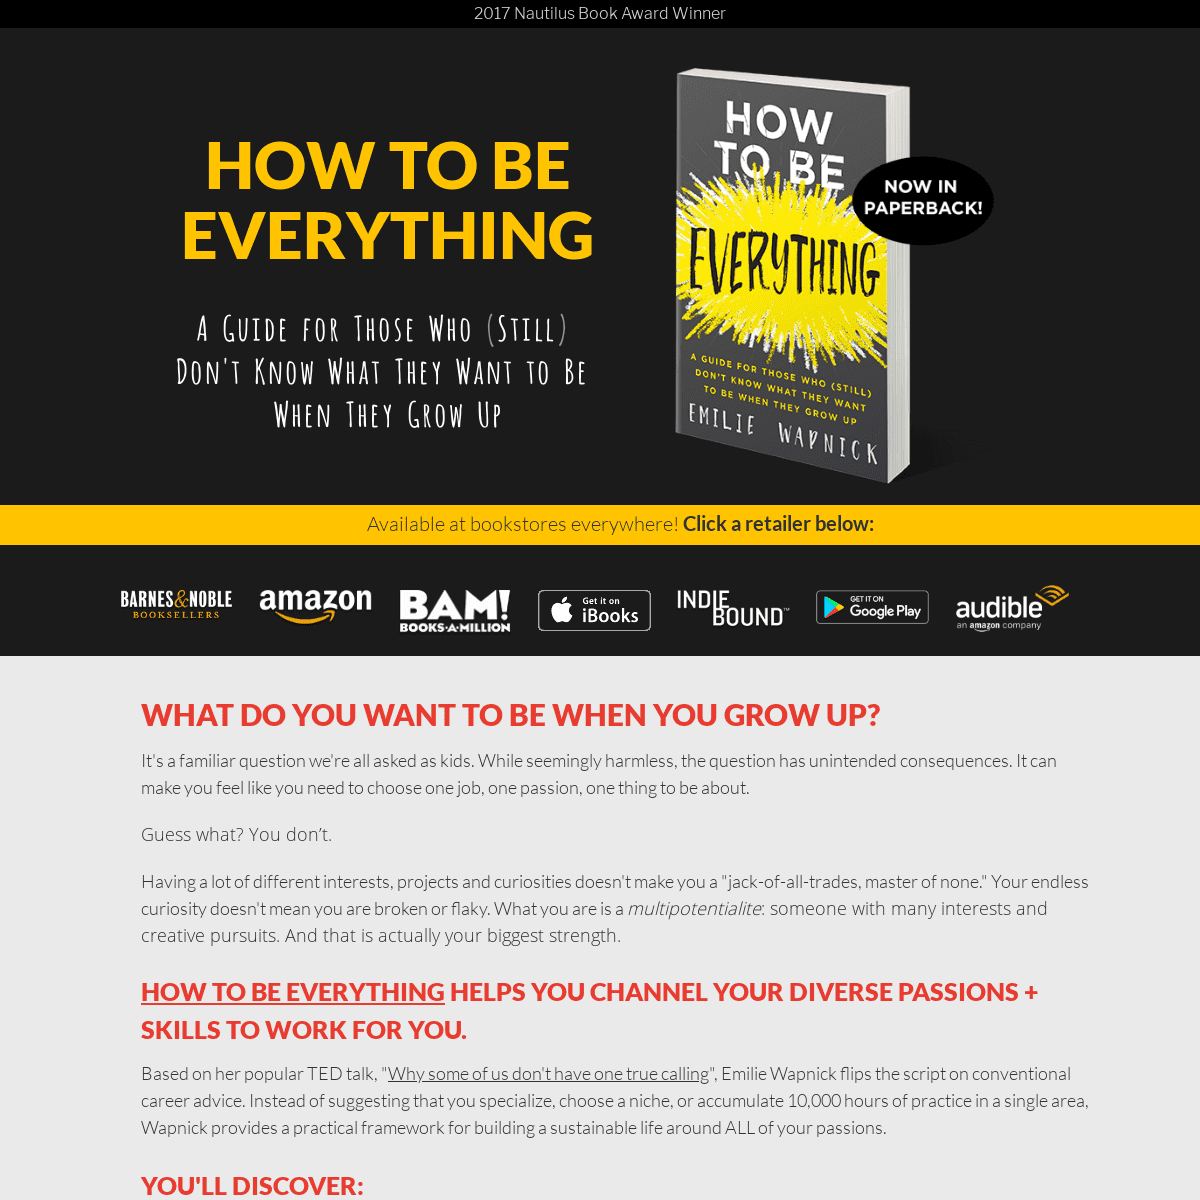 How to Be Everything: A Guide for Those Who (Still) Don’t Know What They Want to Be When They Grow Up - How to Be Everything